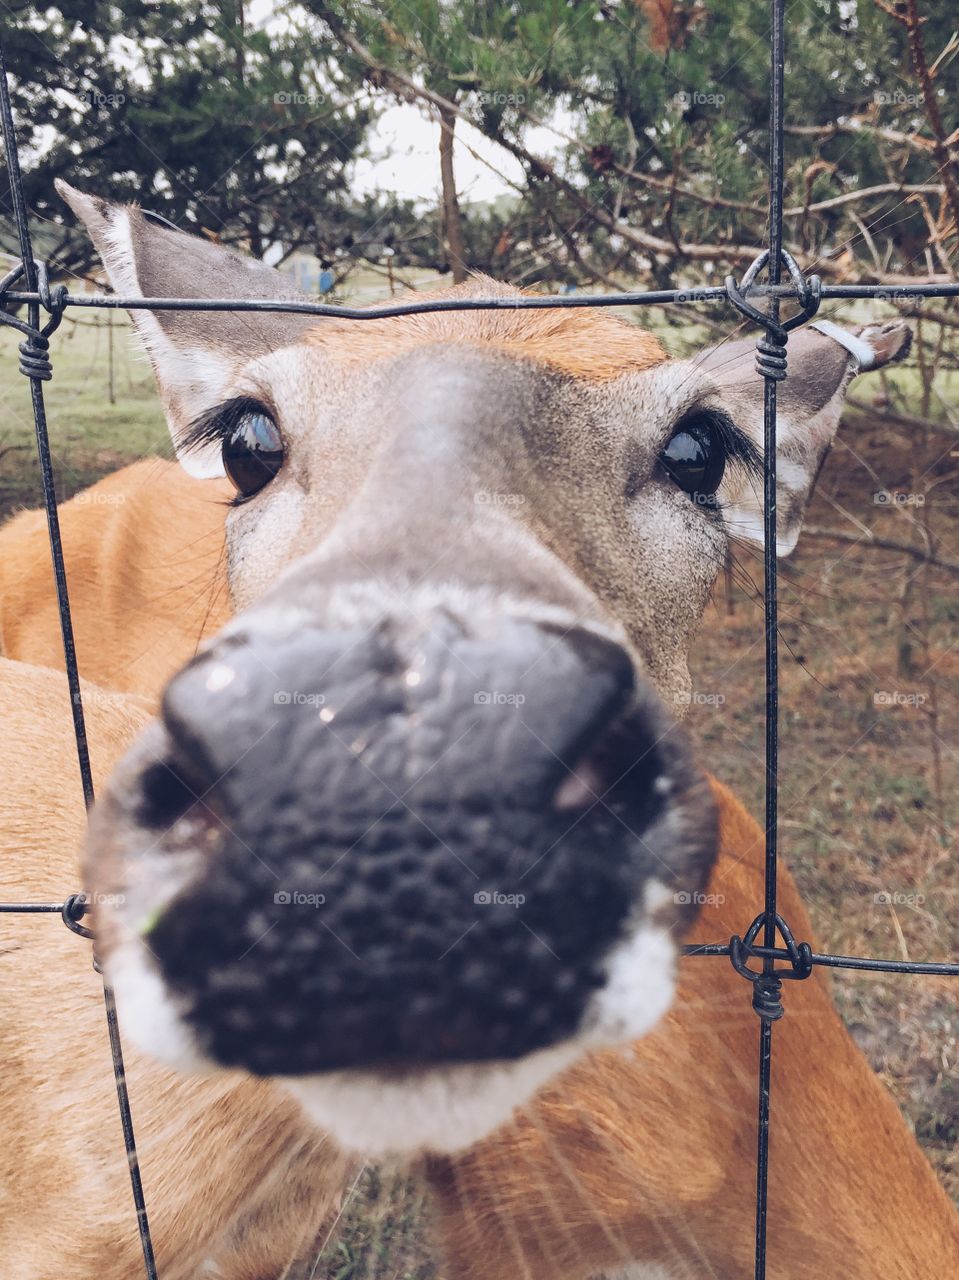 Deer at park. Deer at petting zoo trying to sniff the camera.